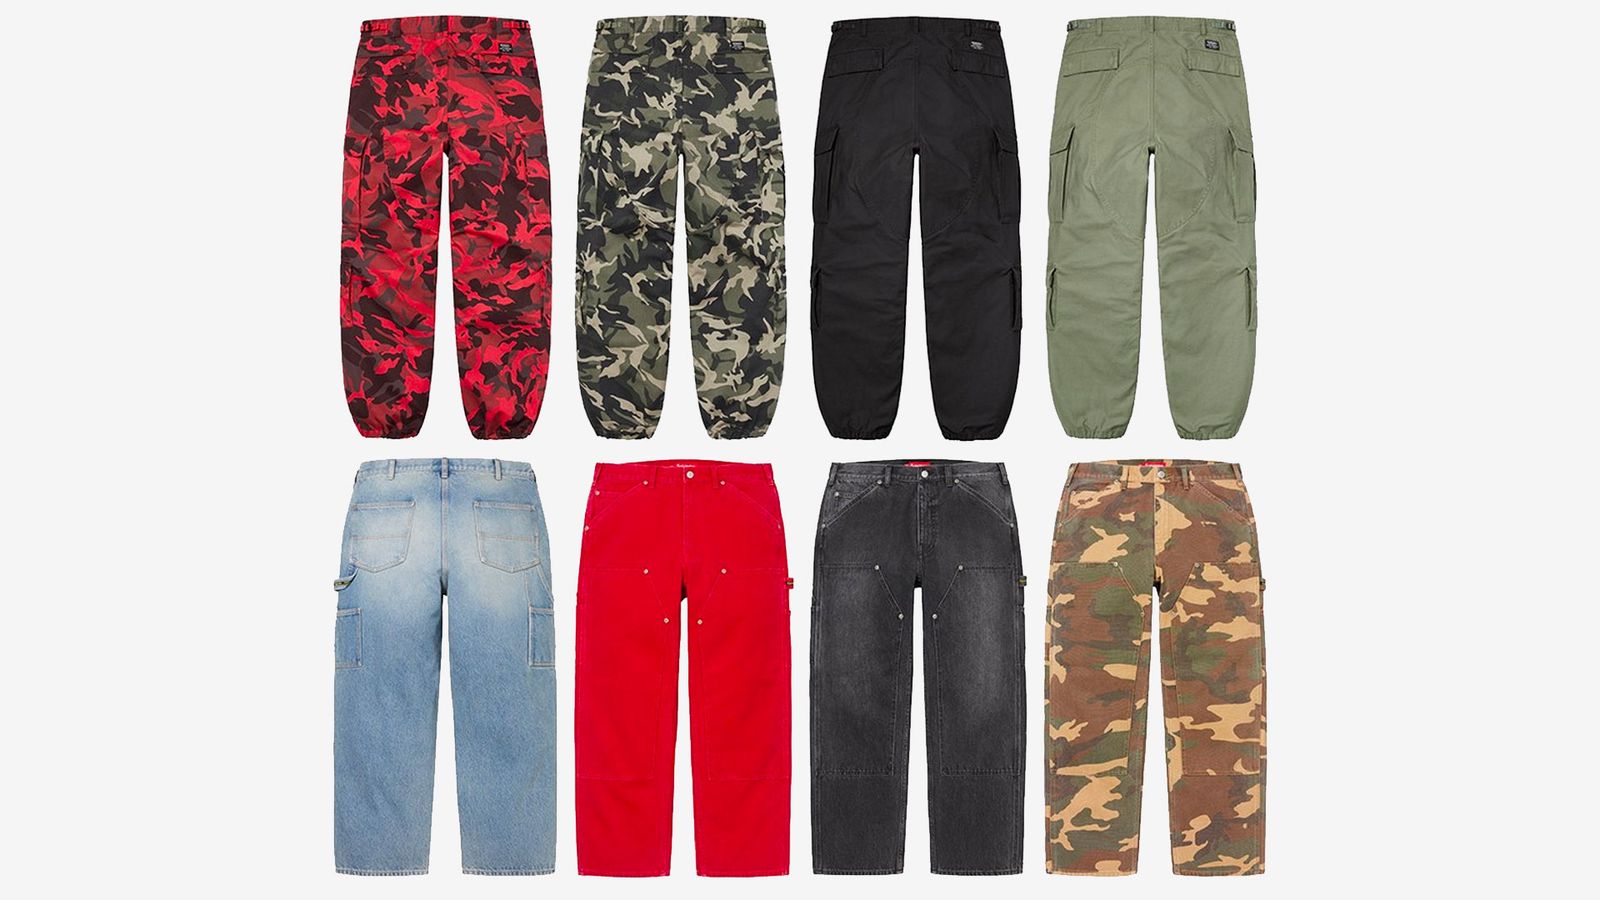 Supreme Spring/Summer 2023 collection - A selection of bottoms including camo cargo pants and jeans.